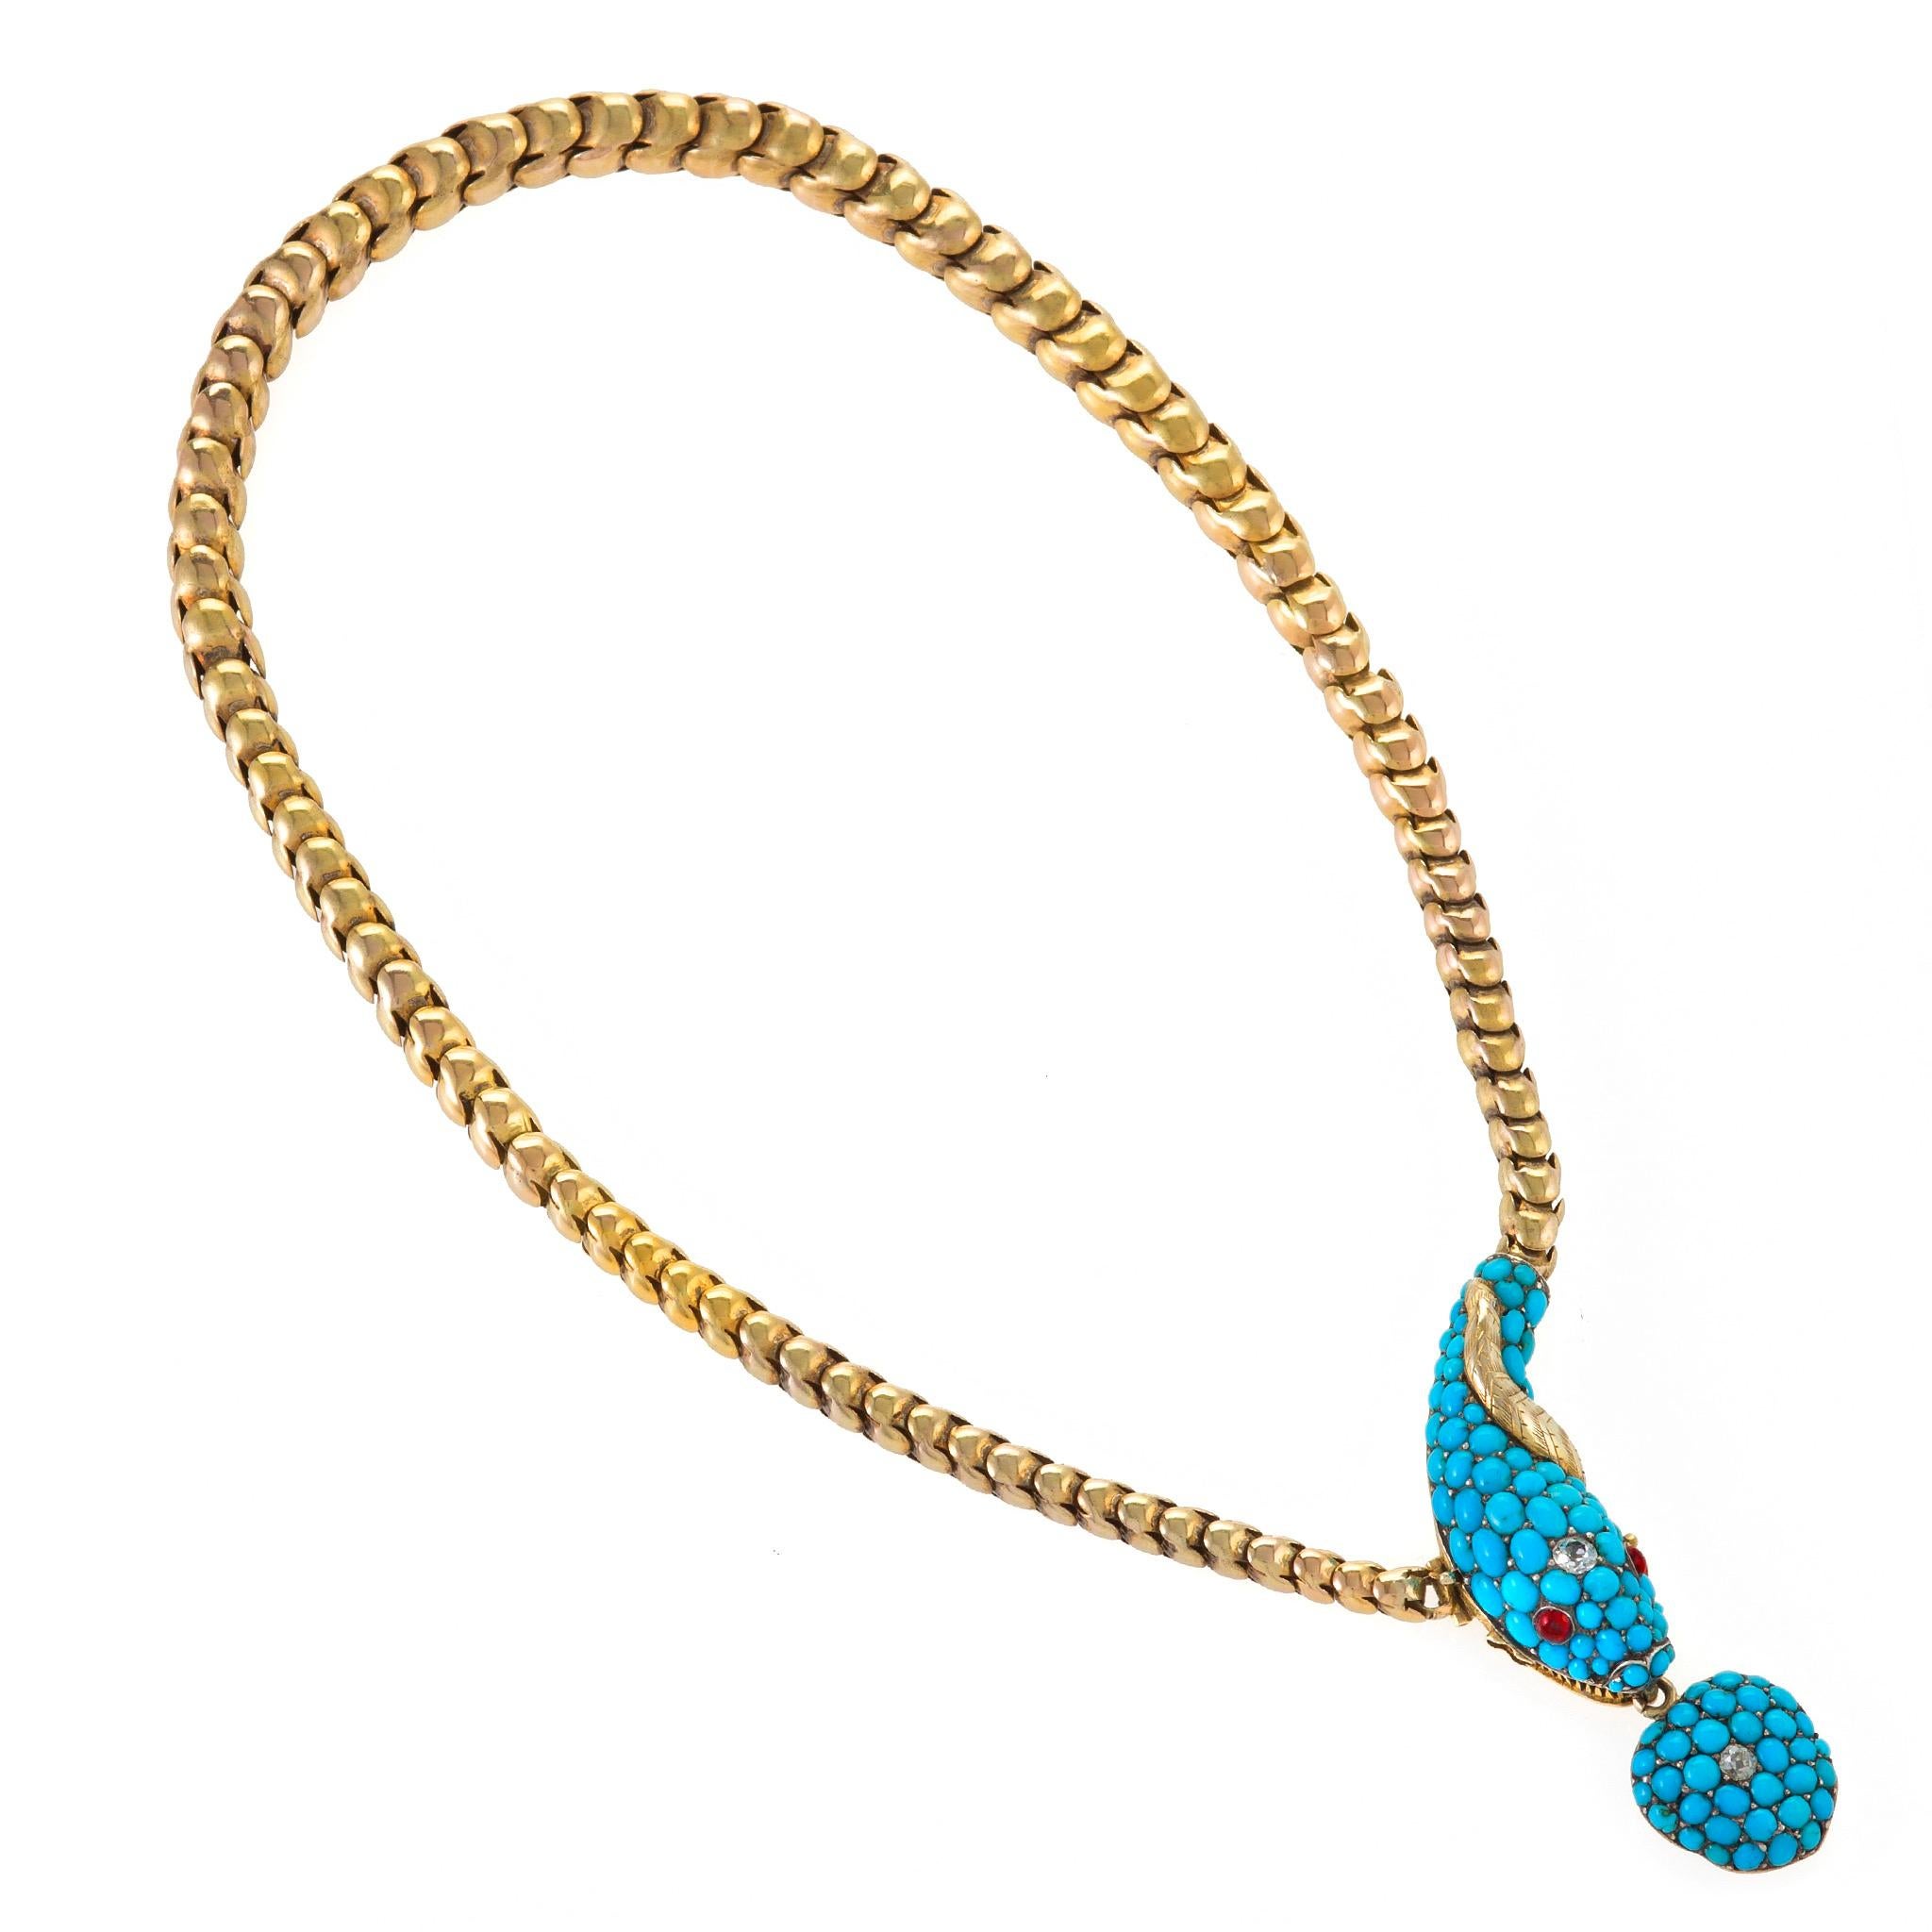 Dating from the 1840s, this gold serpent necklace with heart-shaped locket is set with turquoise, diamonds, and rubies. The tapering flexible necklace of gold S-form links resembling a snake’s patterned body is designed as a serpent with pave-set